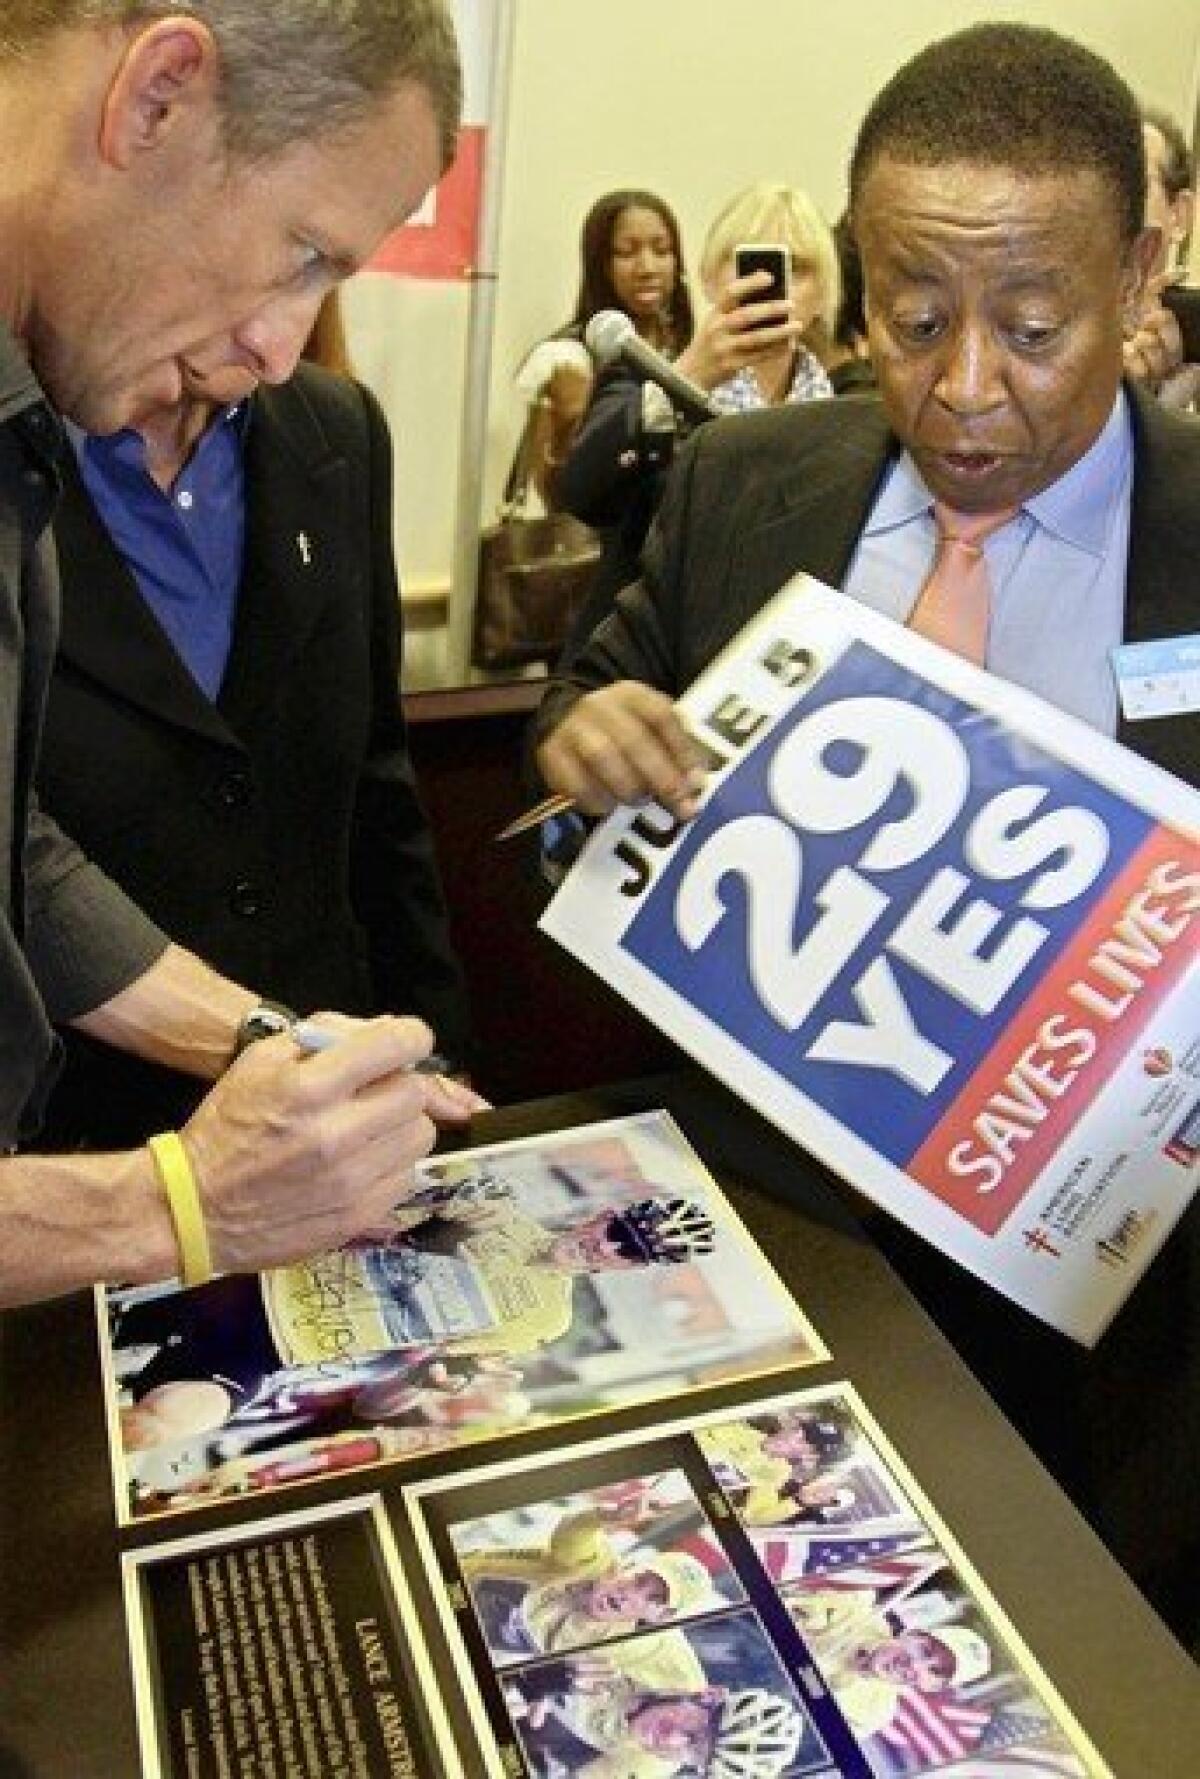 Lance Armstrong, left, signs an autograph for Proposition 29 supporter Yesewlik "Leo" Ayalew. Armstrong has donated $1.5 million to the Proposition 29 campaign.